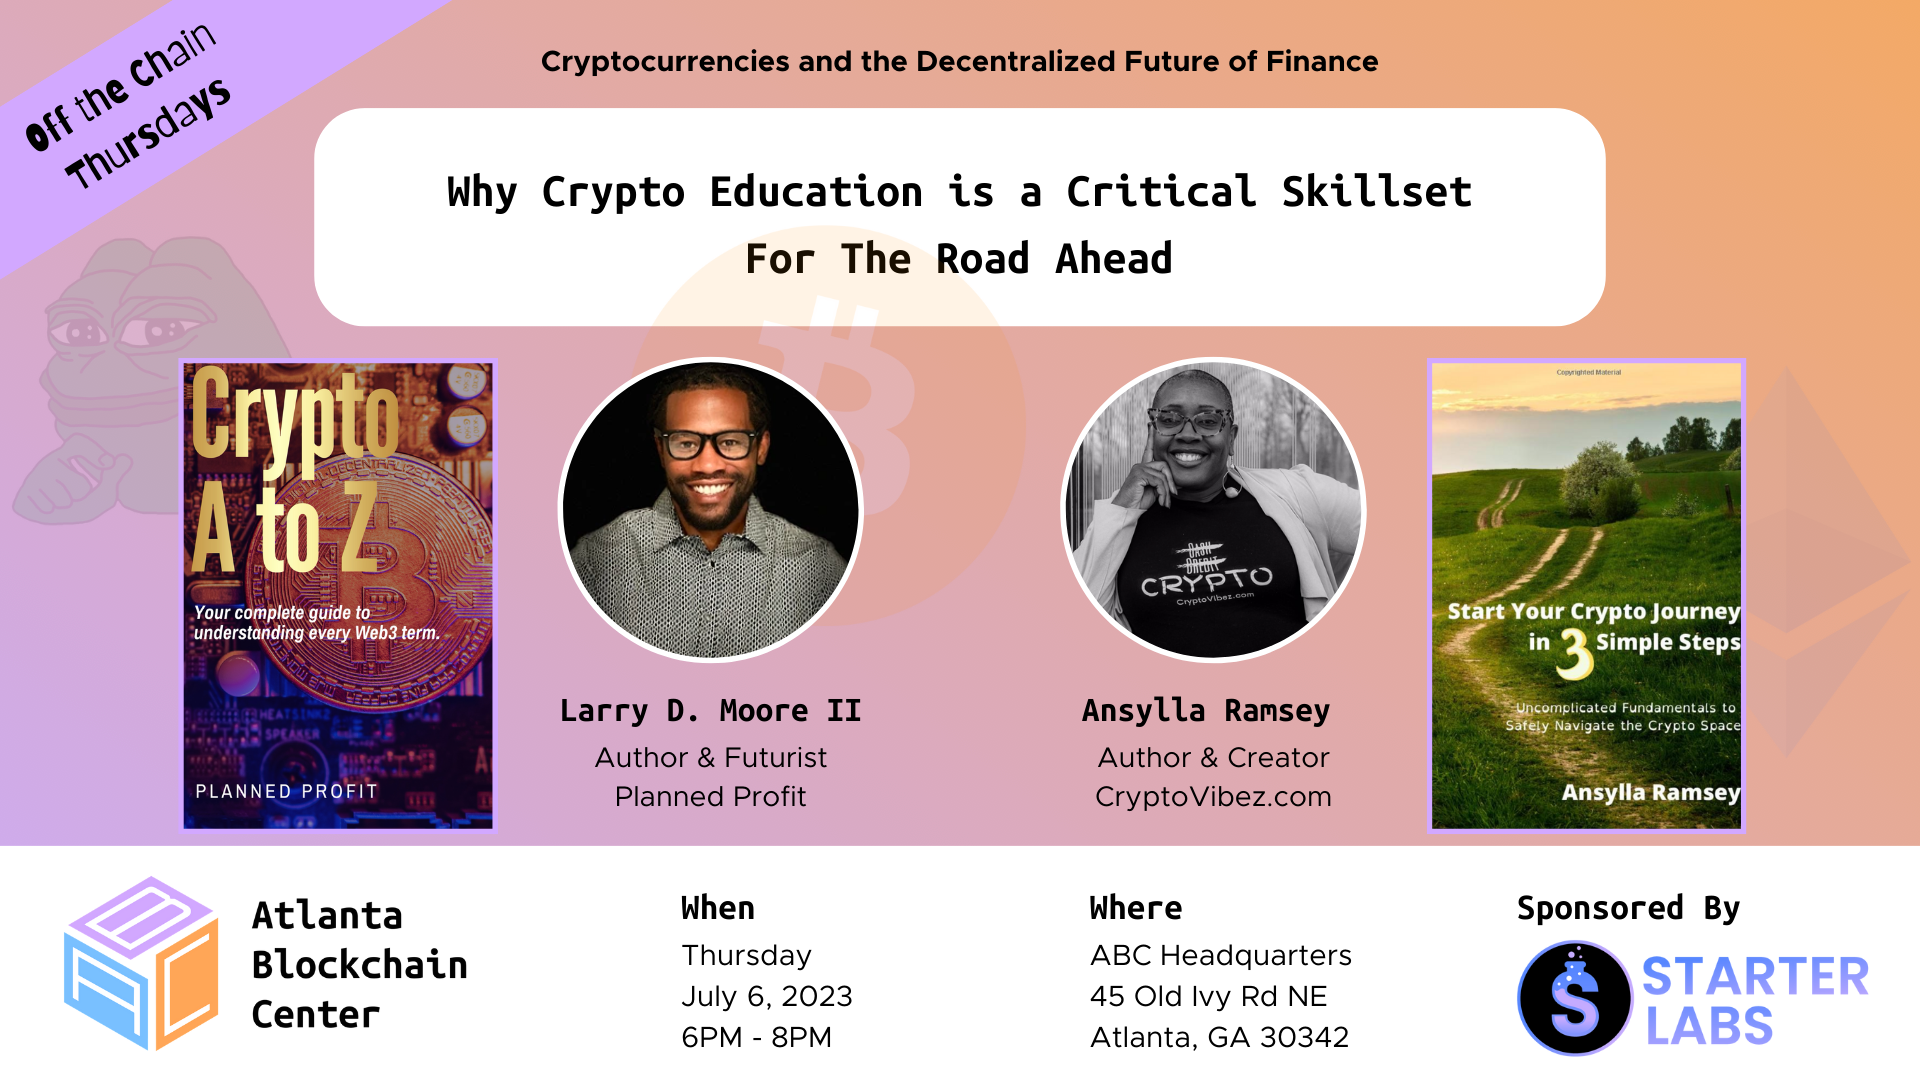 Why Crypto Education is a Critical Skillset For The Road Ahead